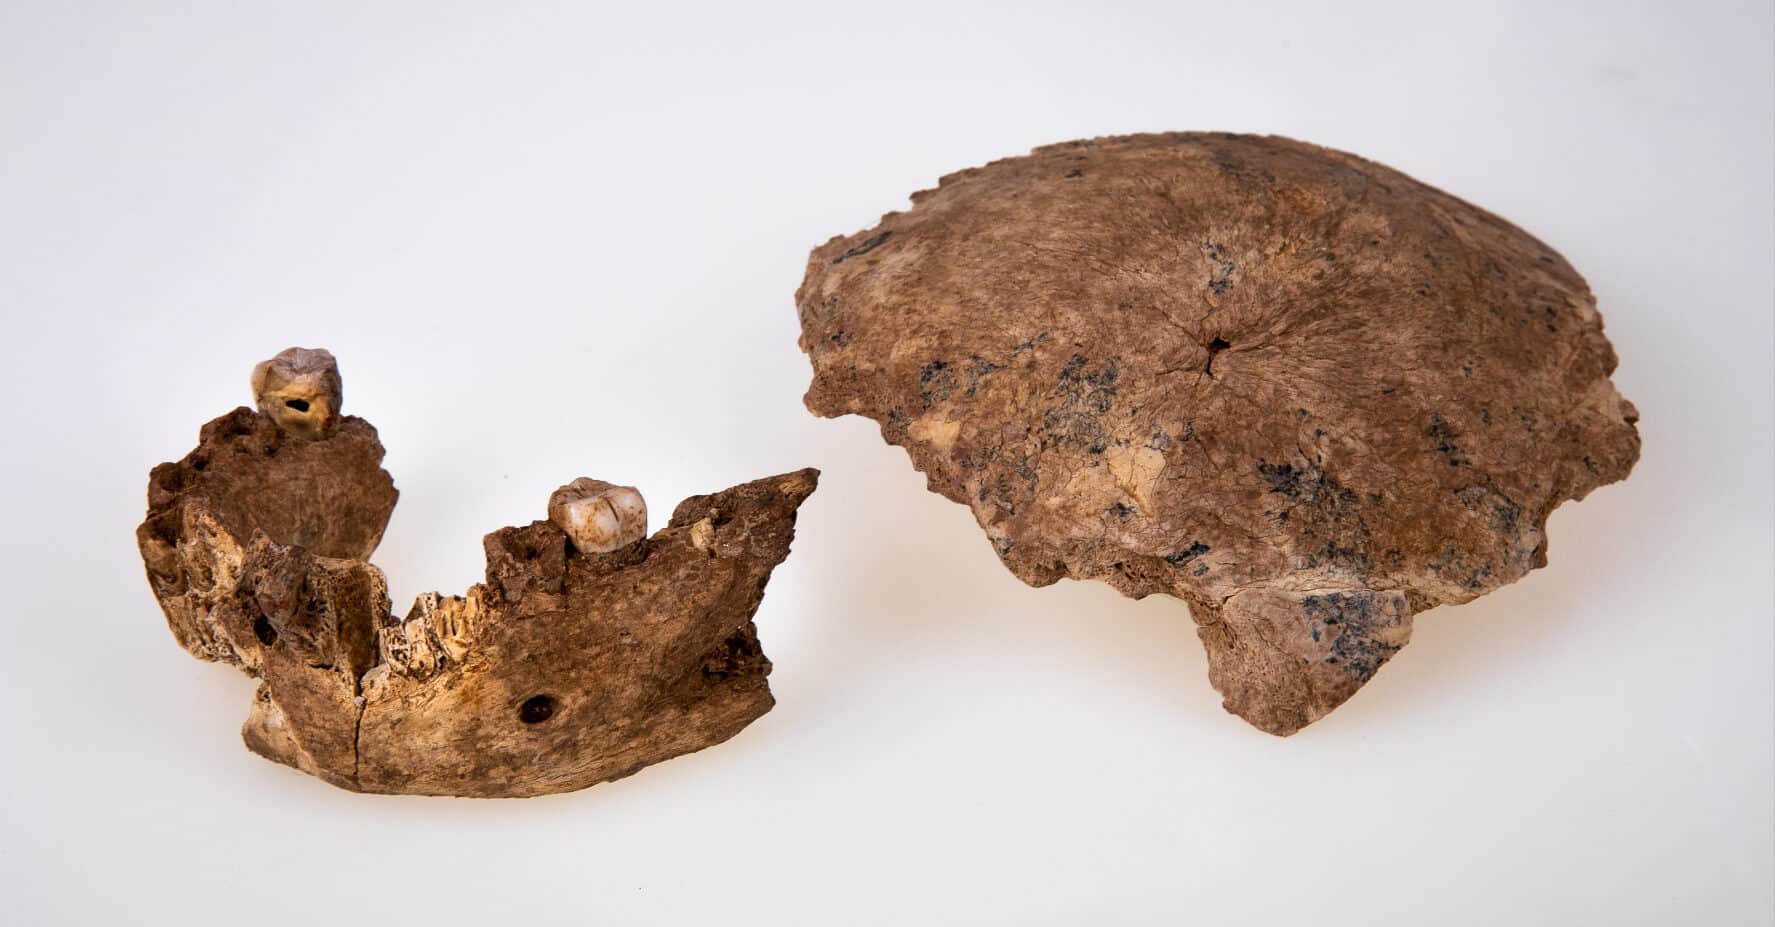 Remains of part of the skull and jaw of the human type from Nesher Ramla.